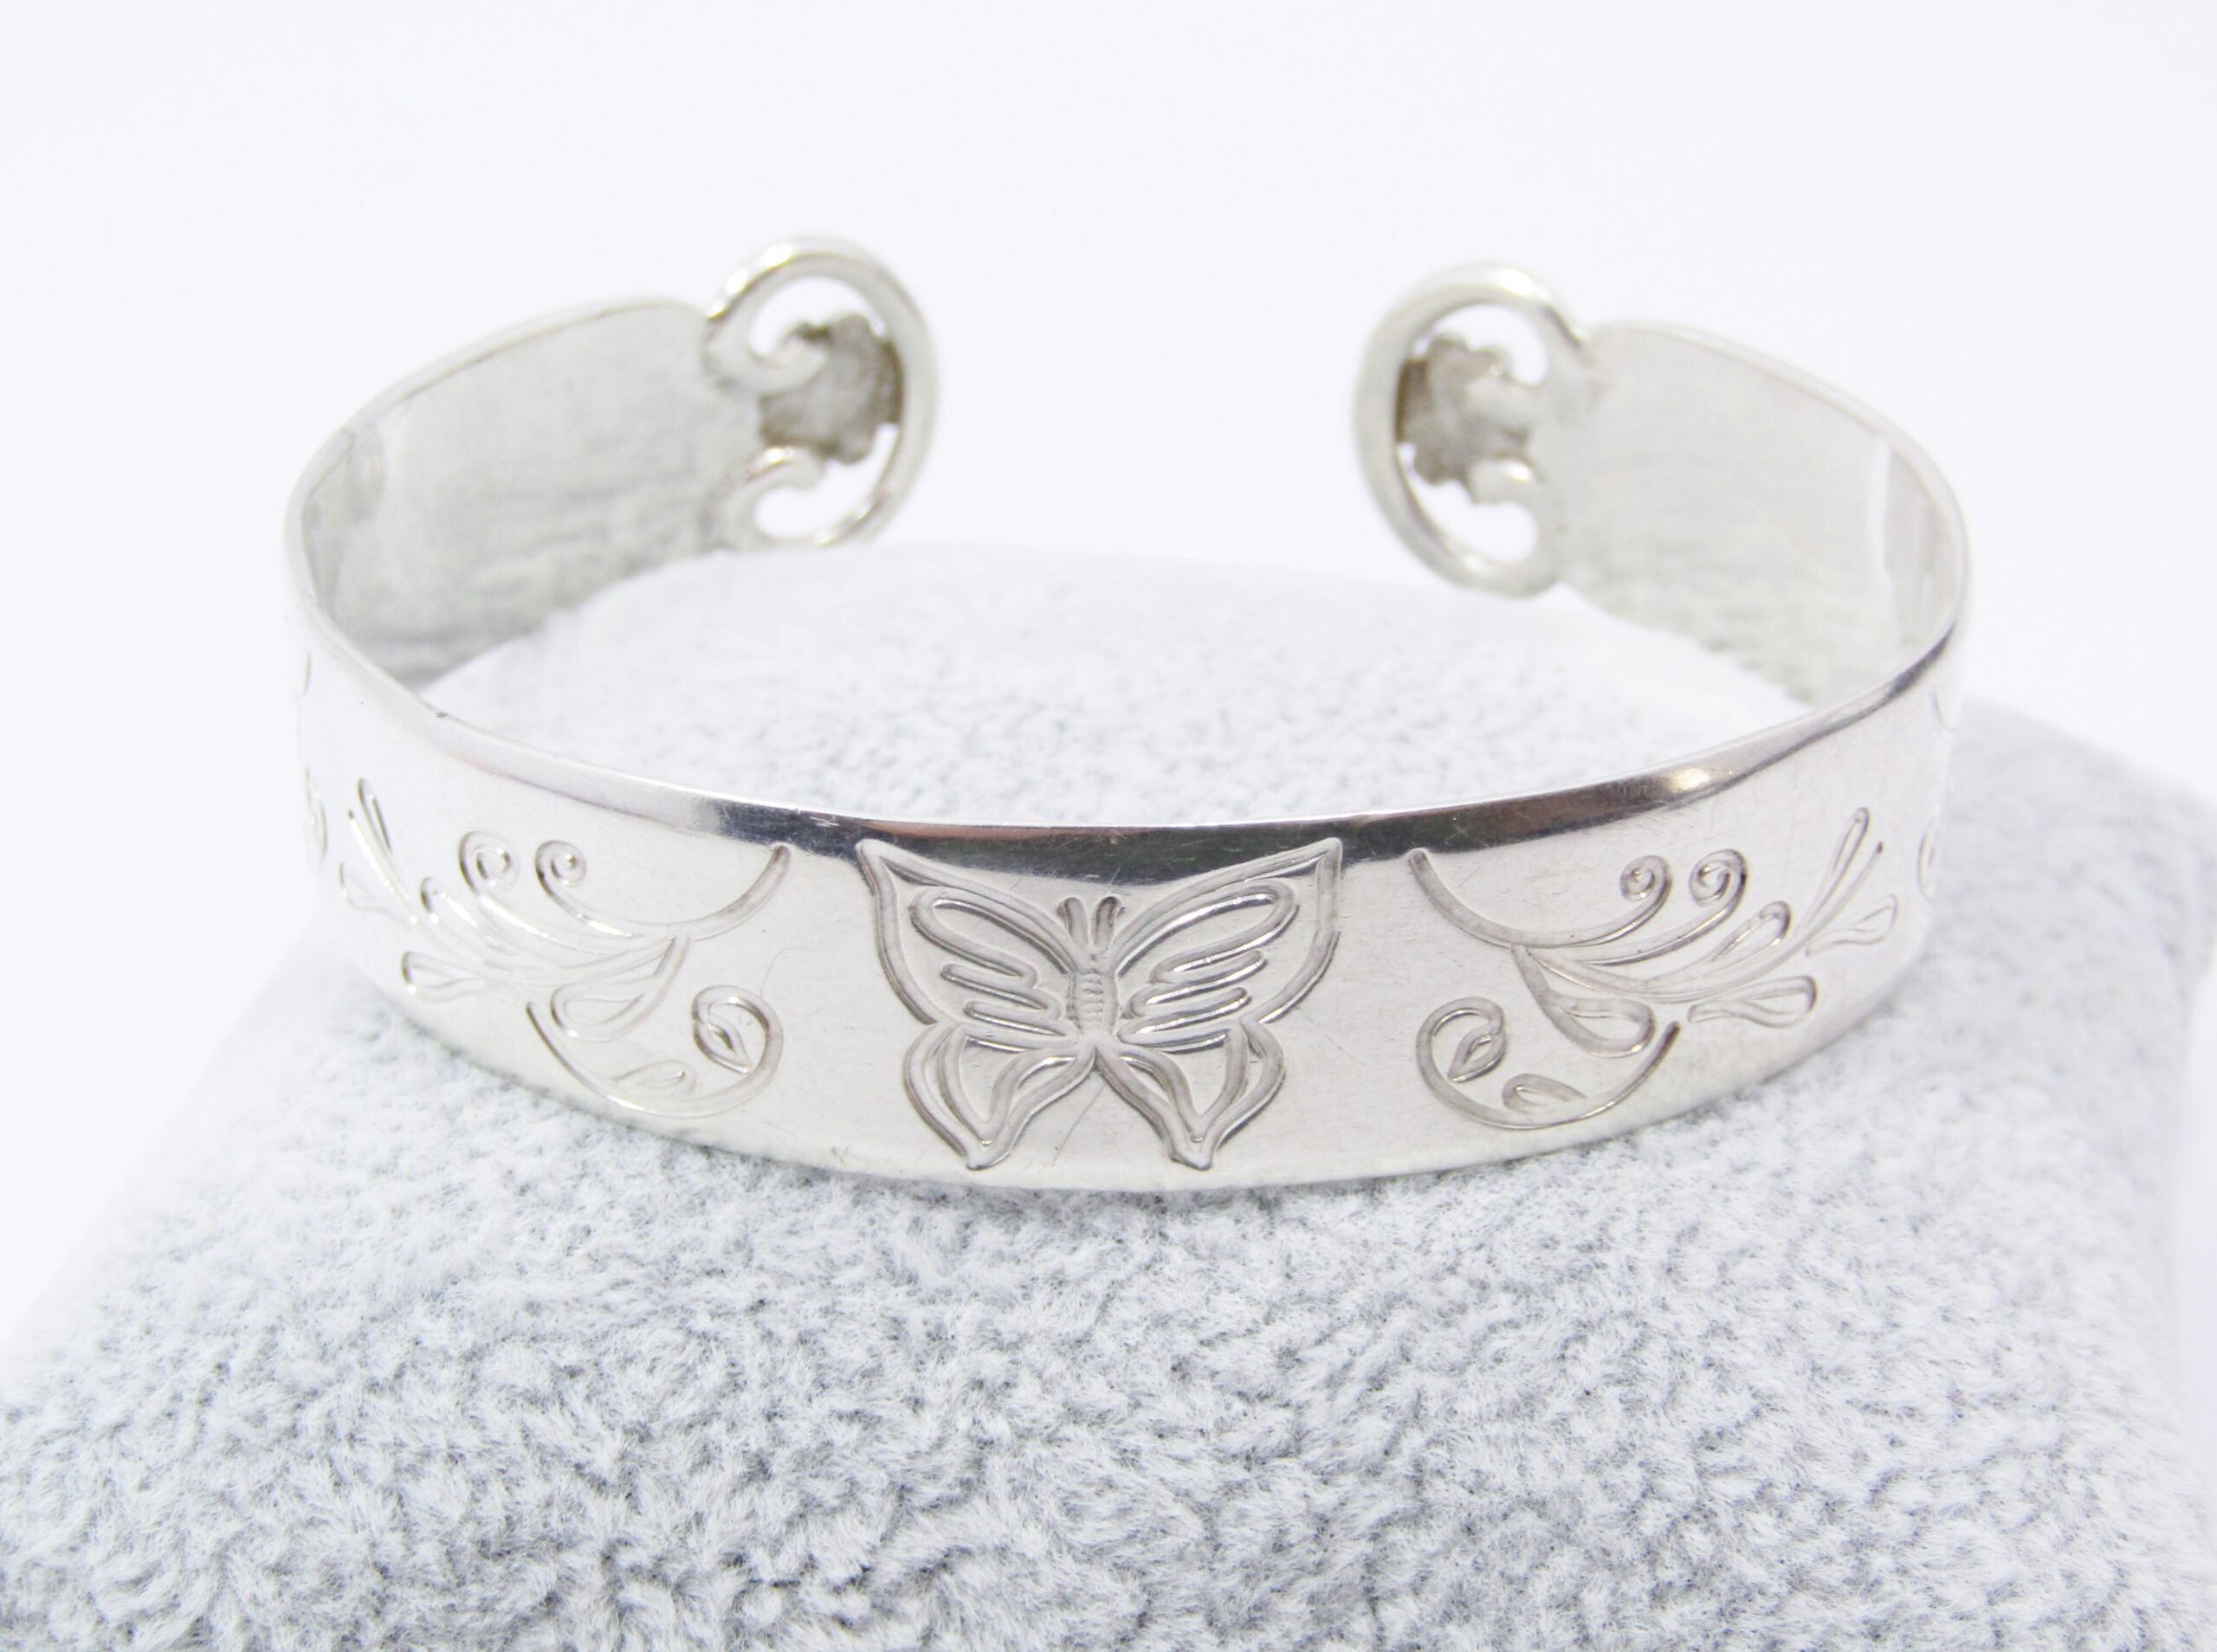 An Amazing Broad Engraved Cuff Bangle With a Flower Design Detail on The Ends of The Cuff in Sterling Silver.